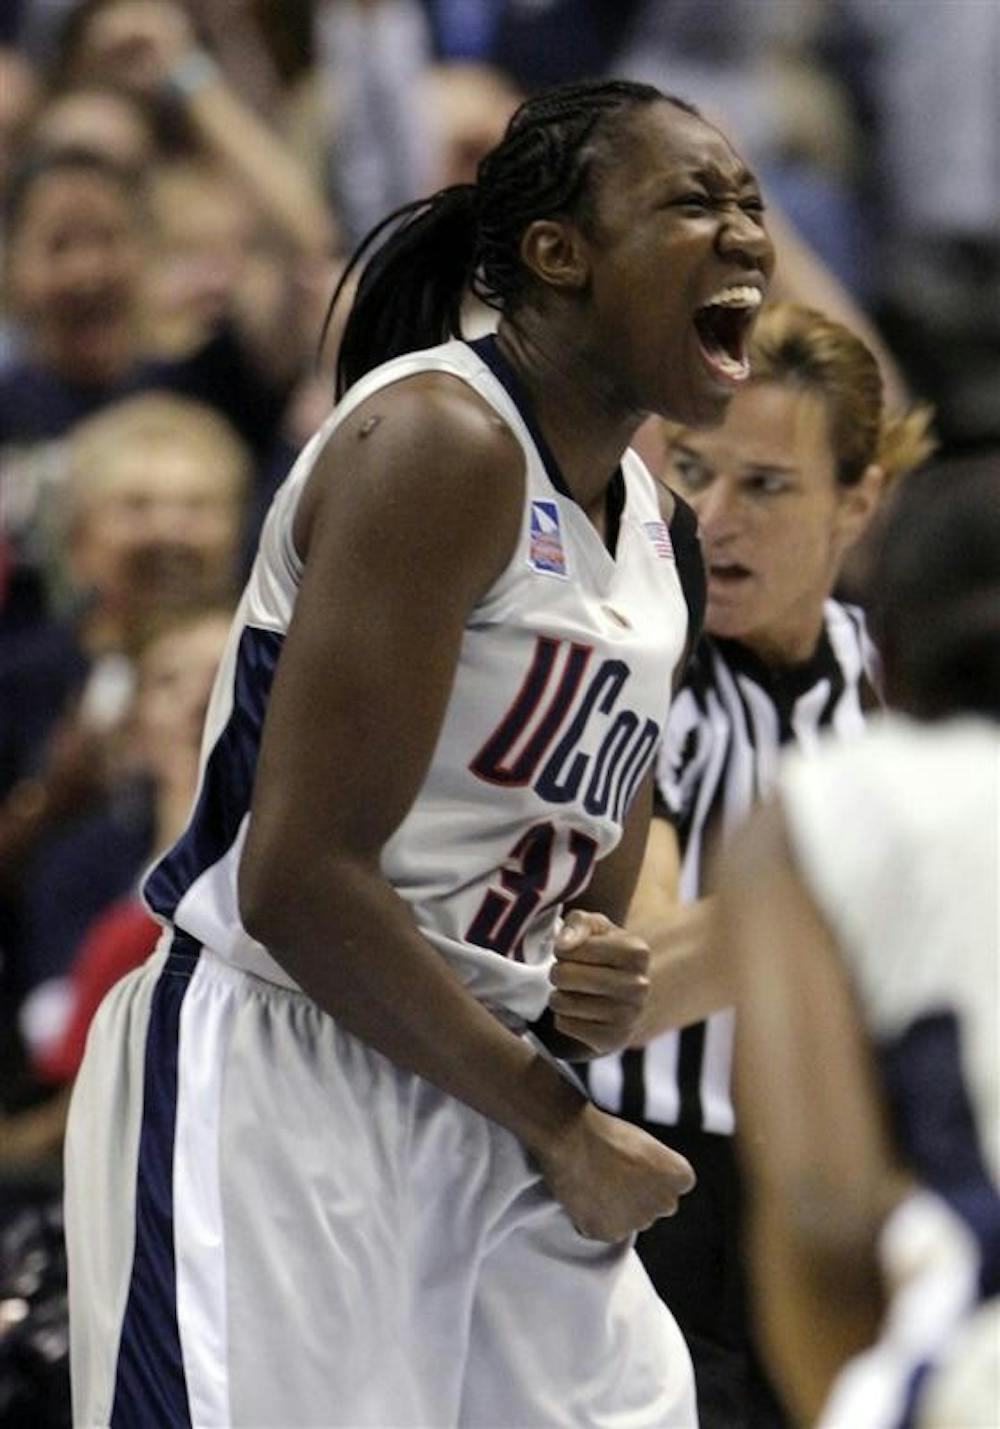 Connecticut's Tina Charles yells after a basket in the second half of the championship game against Louisville at the women's NCAA college basketball tournament Final Four on Tuesday in St. Louis.